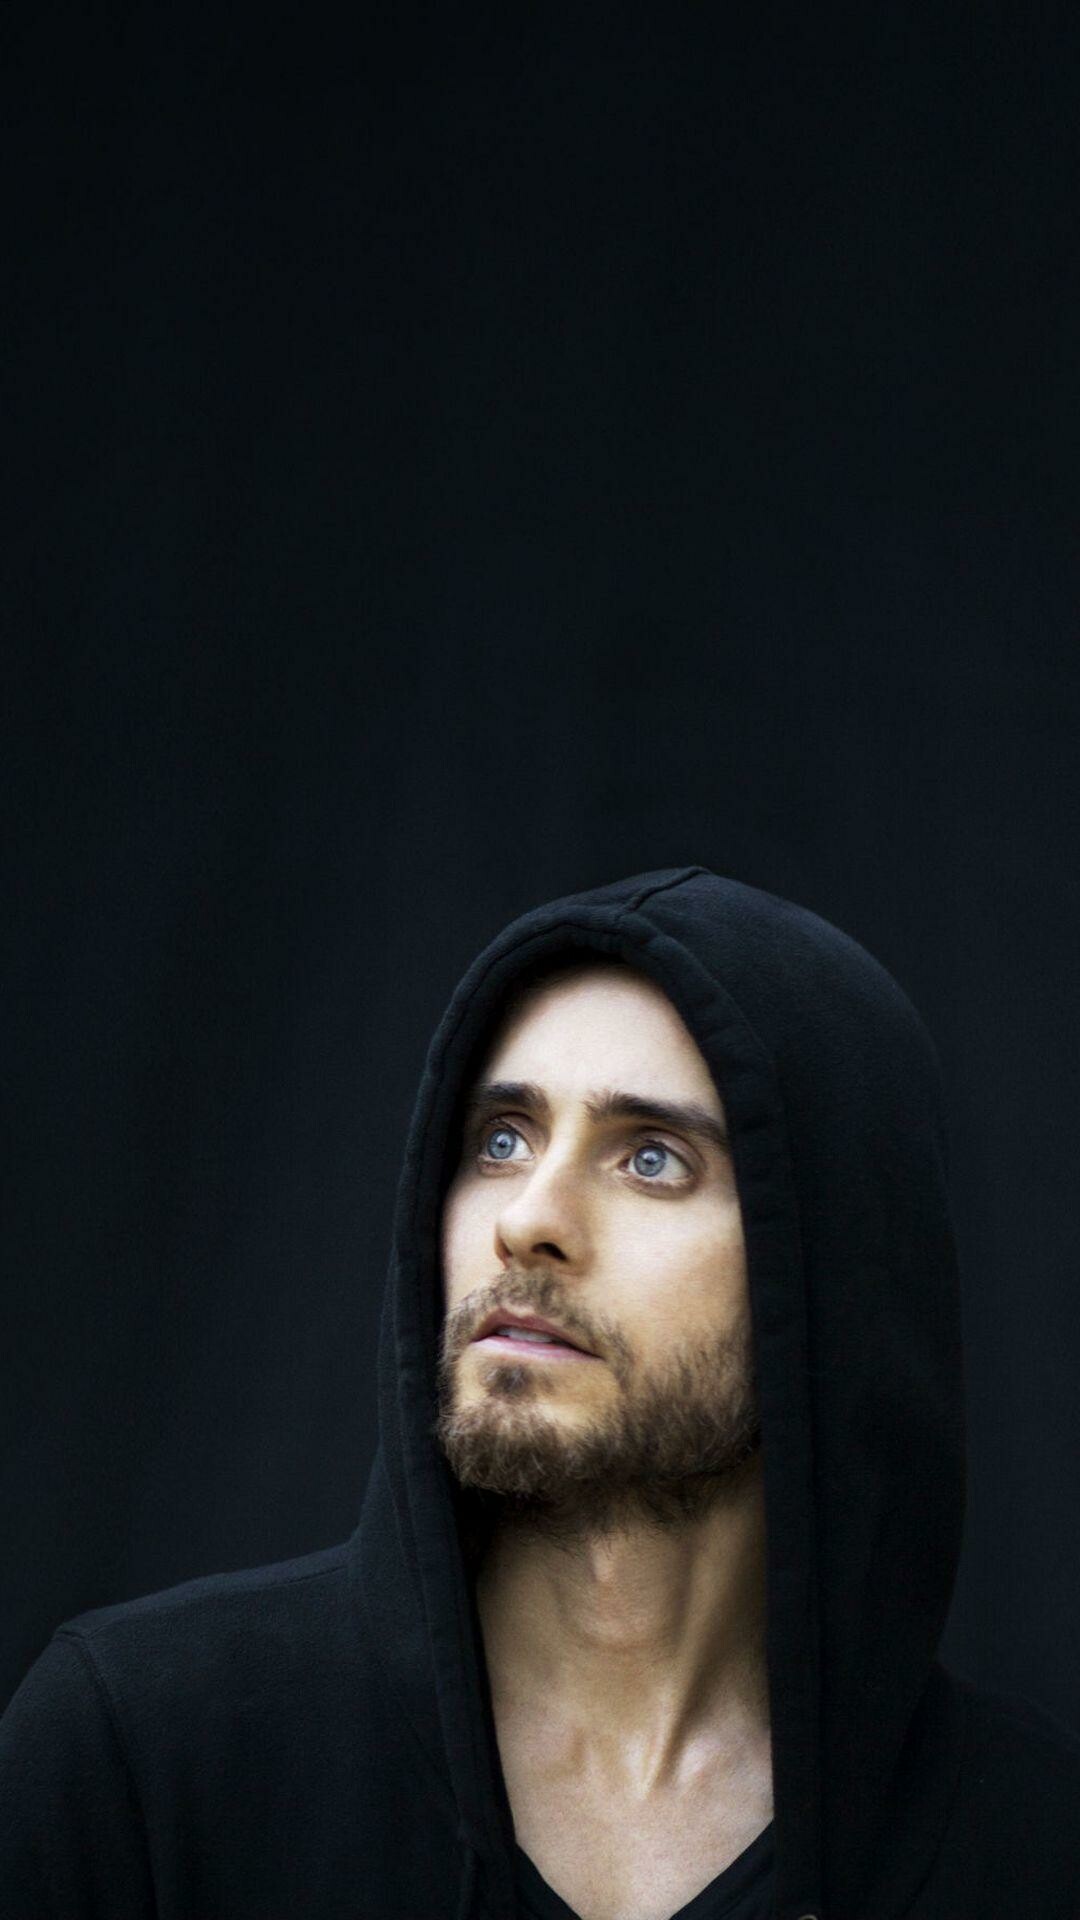 Jared Leto: An American actor and musician, Dr. Michael Morbius. 1080x1920 Full HD Background.